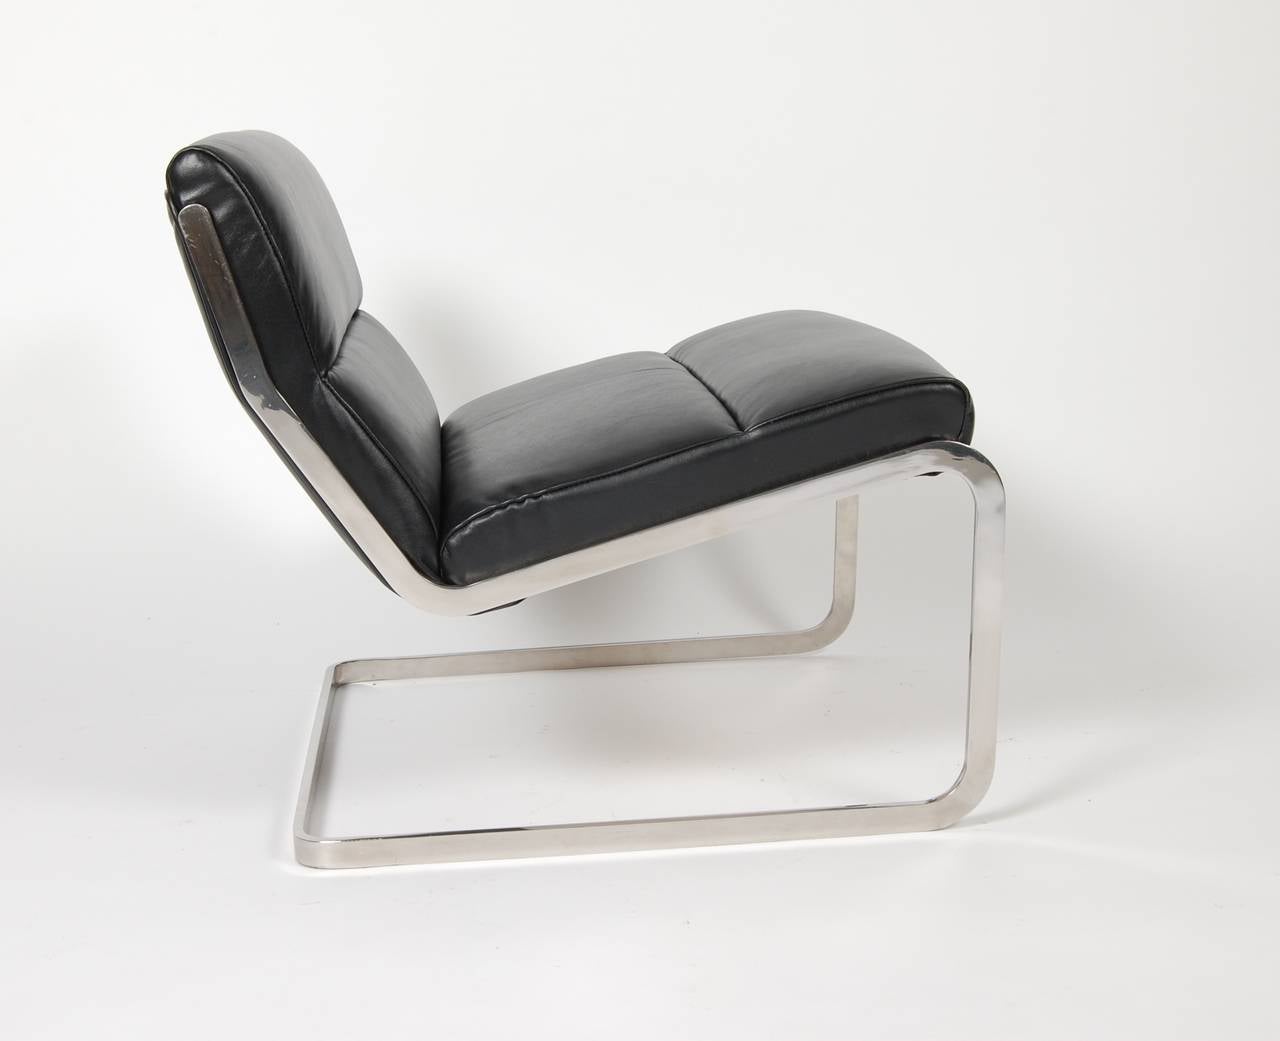 Swiss Leather and Stainless Steel Cantilever Lounge Chair, 1960s